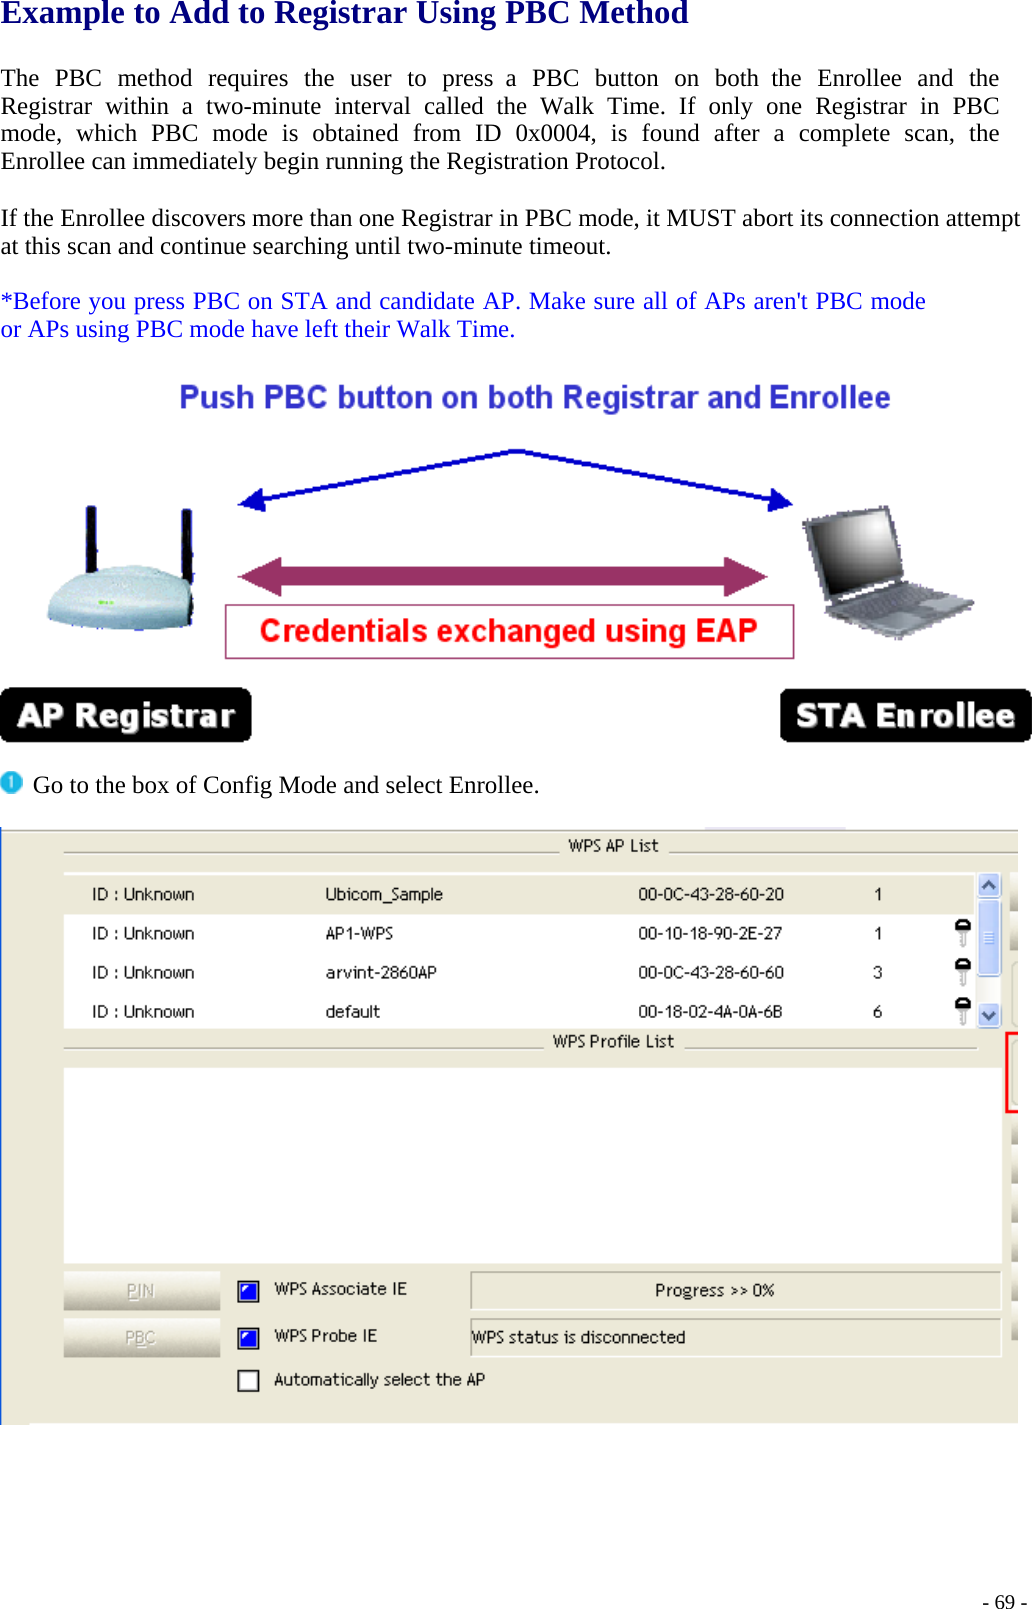 Example to Add to Registrar Using PBC Method   The PBC method requires the user to press a PBC button on both the Enrollee and the Registrar within a two-minute interval called the Walk Time. If only one Registrar in PBC mode, which PBC mode is obtained from ID 0x0004, is found after a complete scan, the Enrollee can immediately begin running the Registration Protocol.  If the Enrollee discovers more than one Registrar in PBC mode, it MUST abort its connection attempt at this scan and continue searching until two-minute timeout.  *Before you press PBC on STA and candidate AP. Make sure all of APs aren&apos;t PBC mode or APs using PBC mode have left their Walk Time.     Go to the box of Config Mode and select Enrollee.       - 69 -